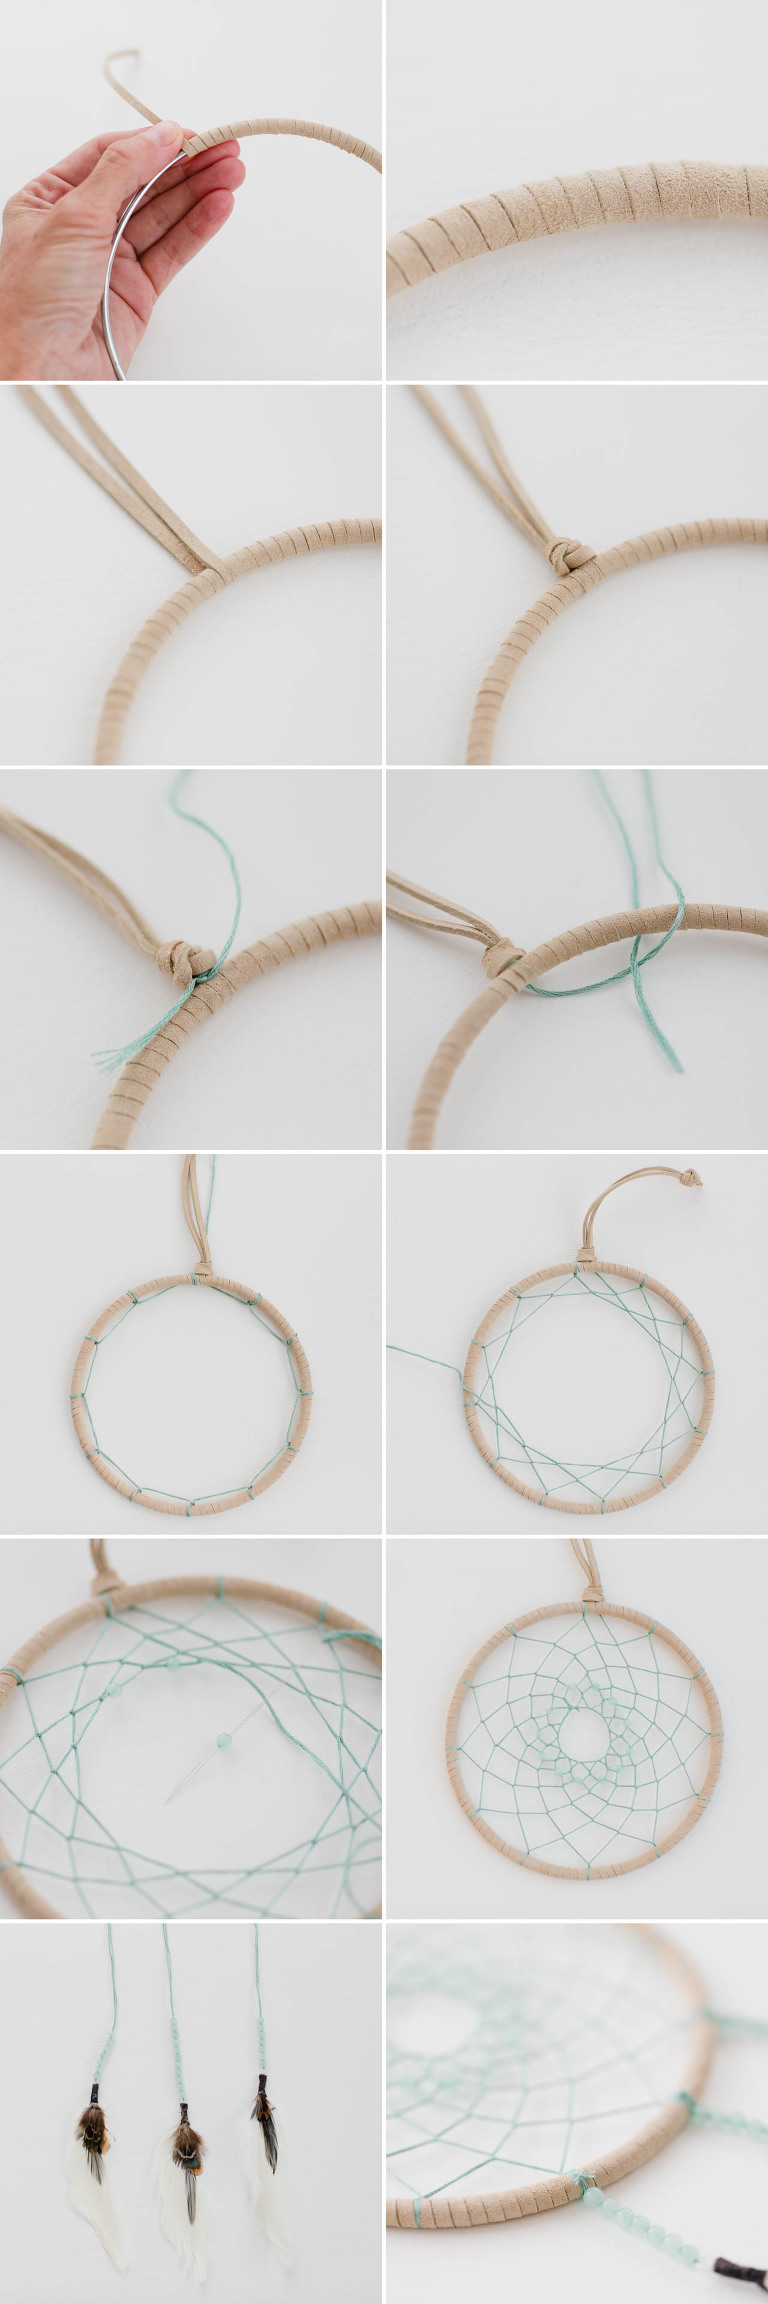 DIY Dreamcatcher Tutorial - easy step-by-step instructions on how to make an Ojibwe Dreamcatcher